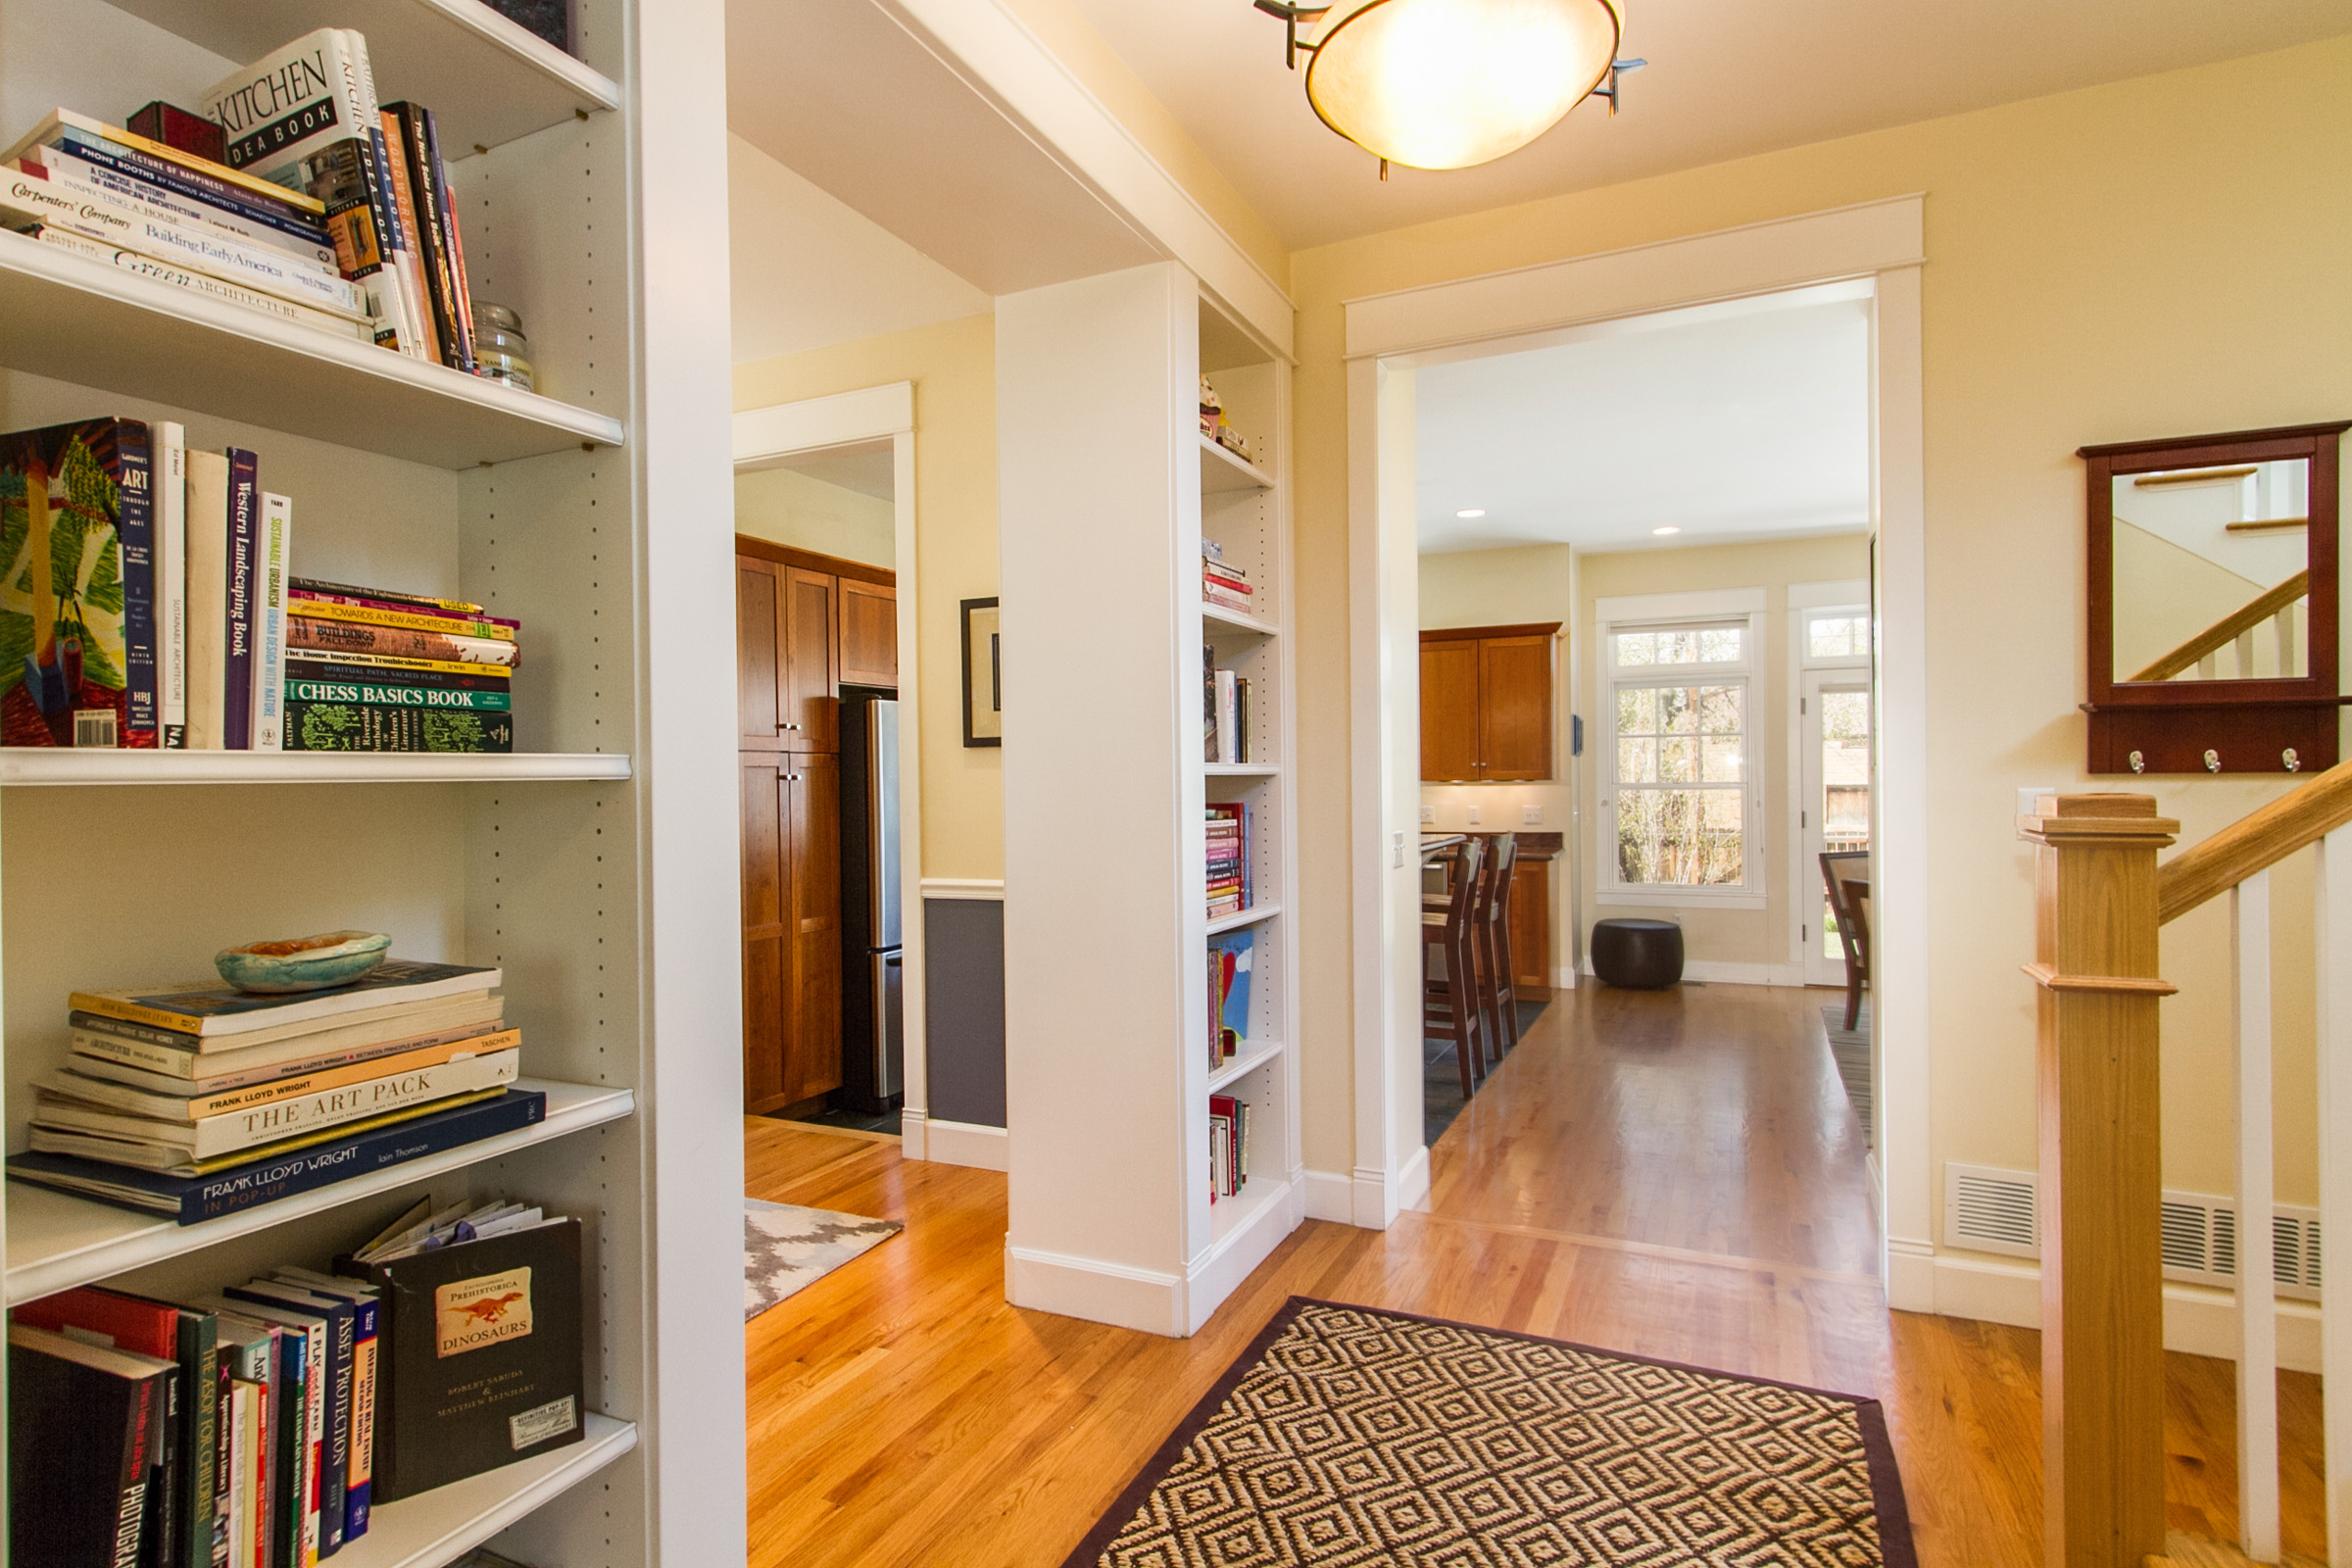 1246088_Central-Hall-Has-Floor-To-Ceiling-Bookcases_high.jpg